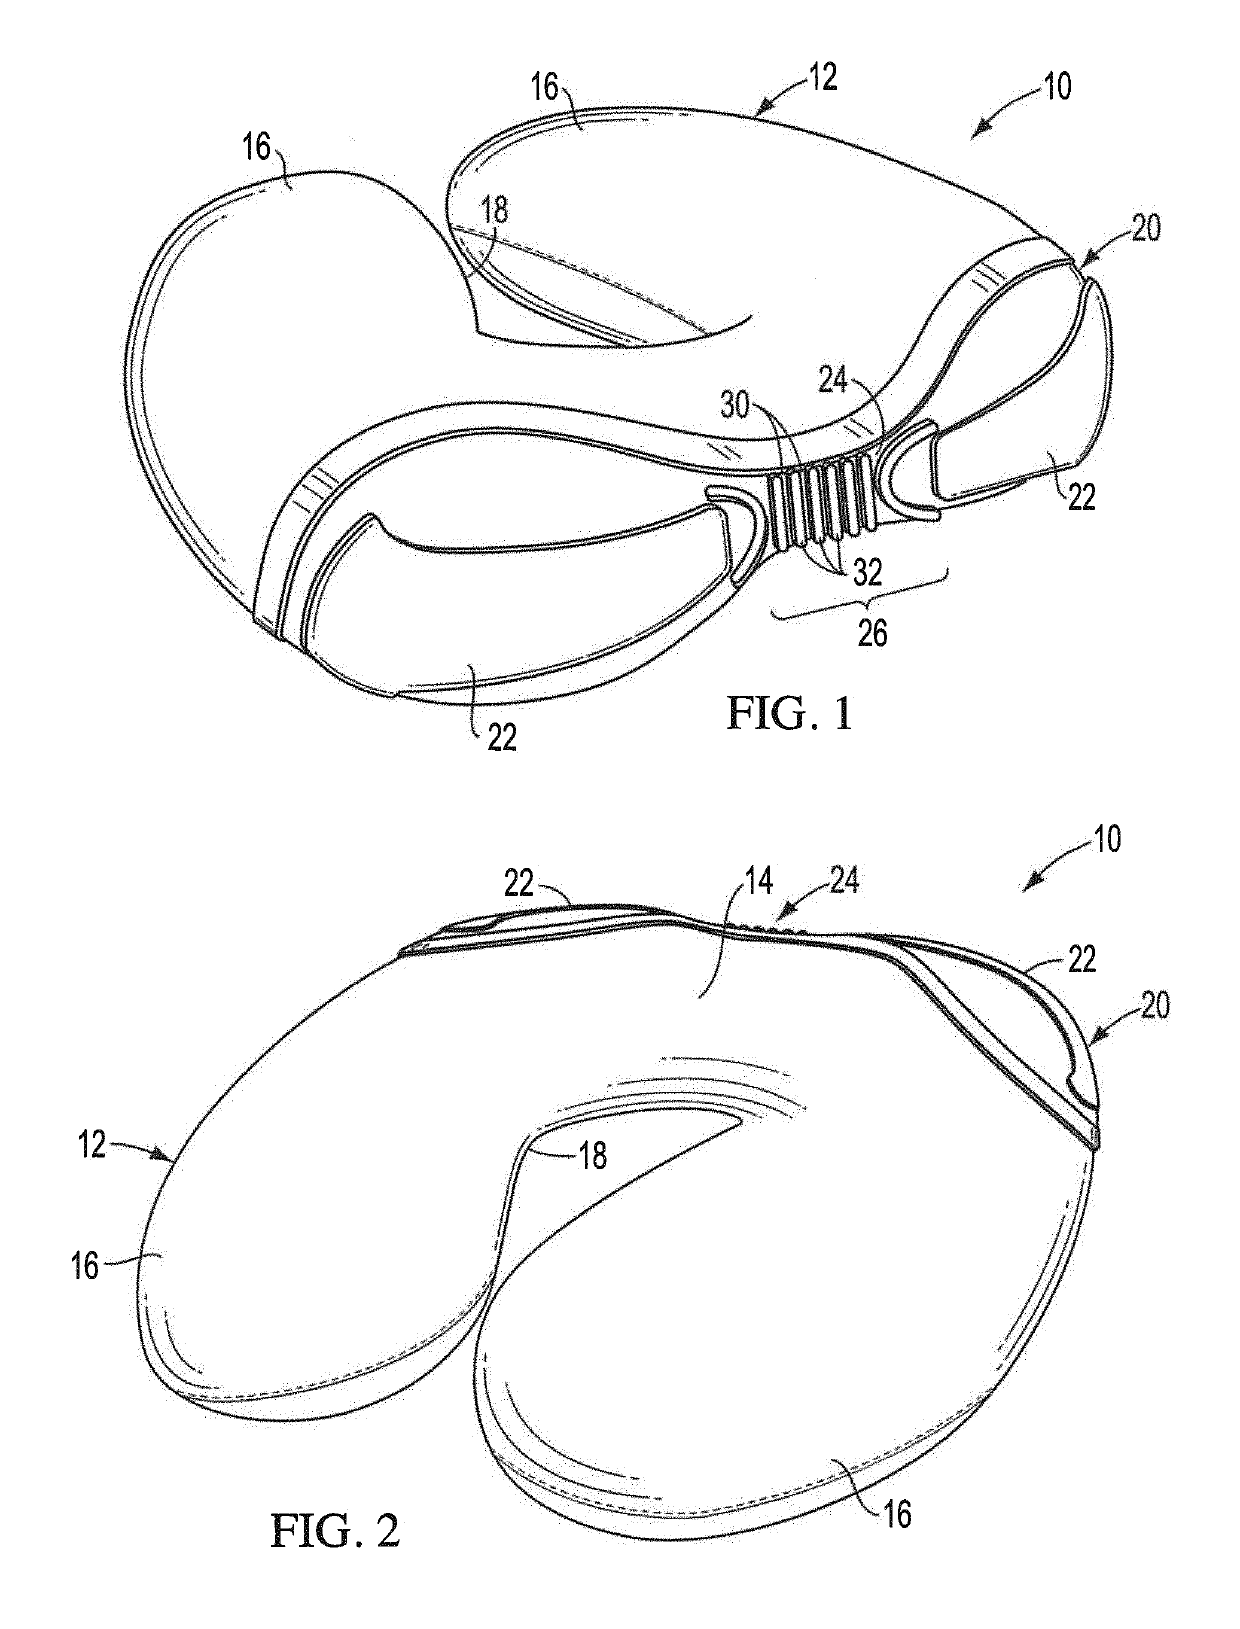 Travel pillow with reactive surfaces for enhanced comfort